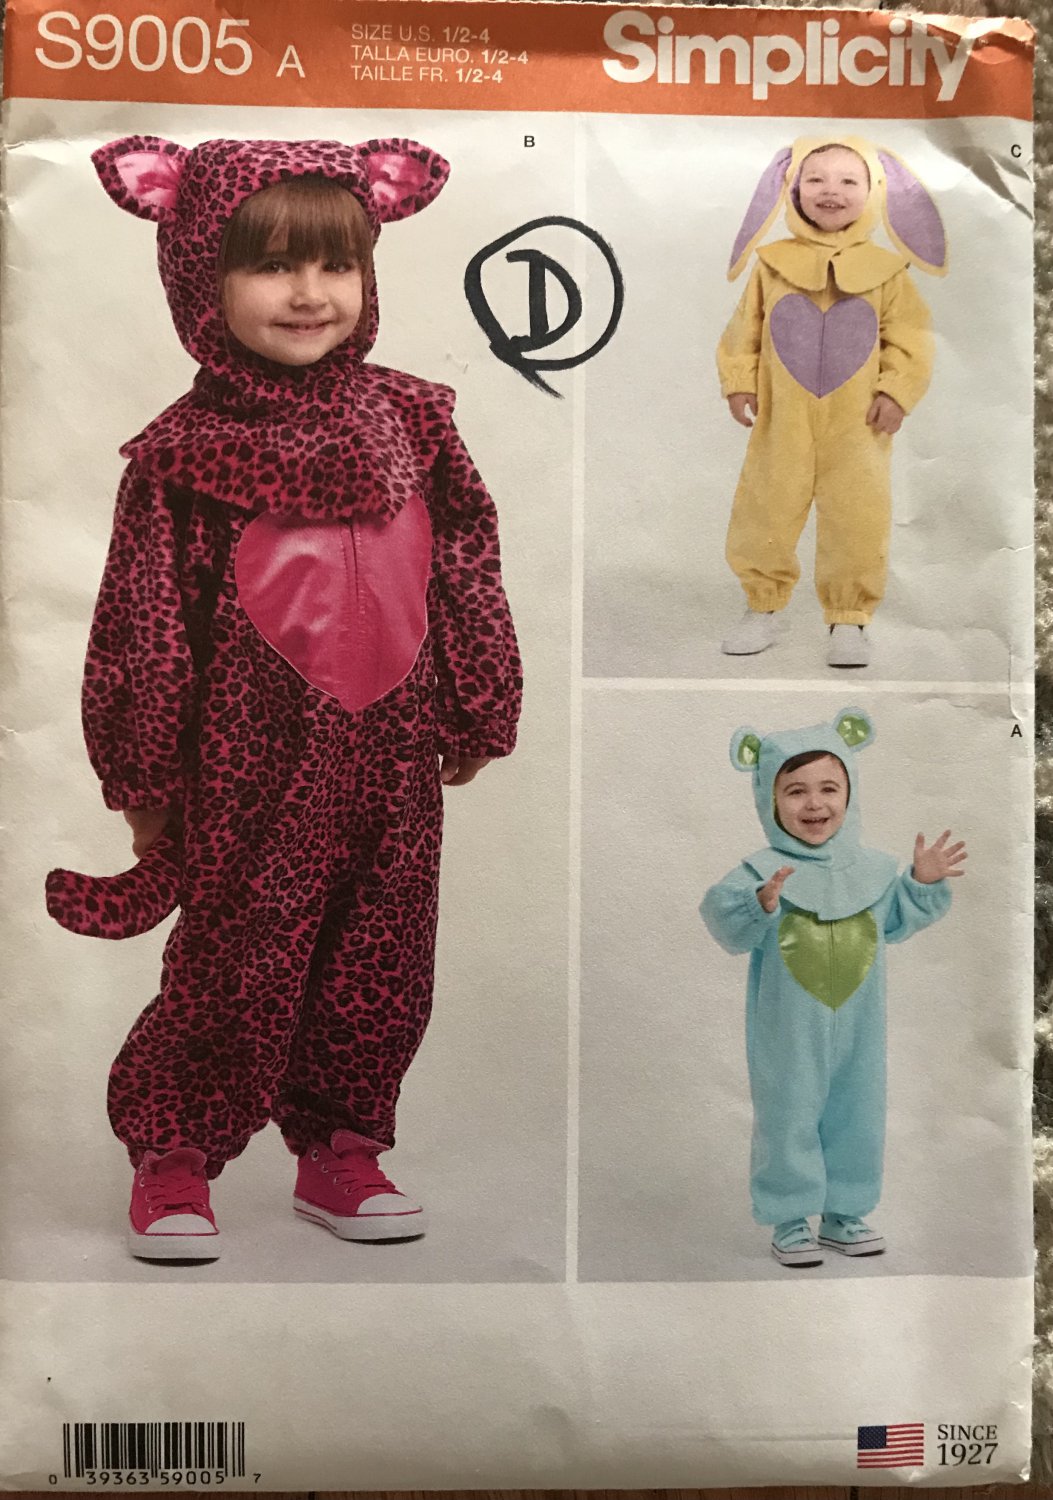 SIMPLICITY S9005 SEWING PATTERN FOR COSTUME TODDLERS (SIZE 1/2-4) Cat, rabbit.